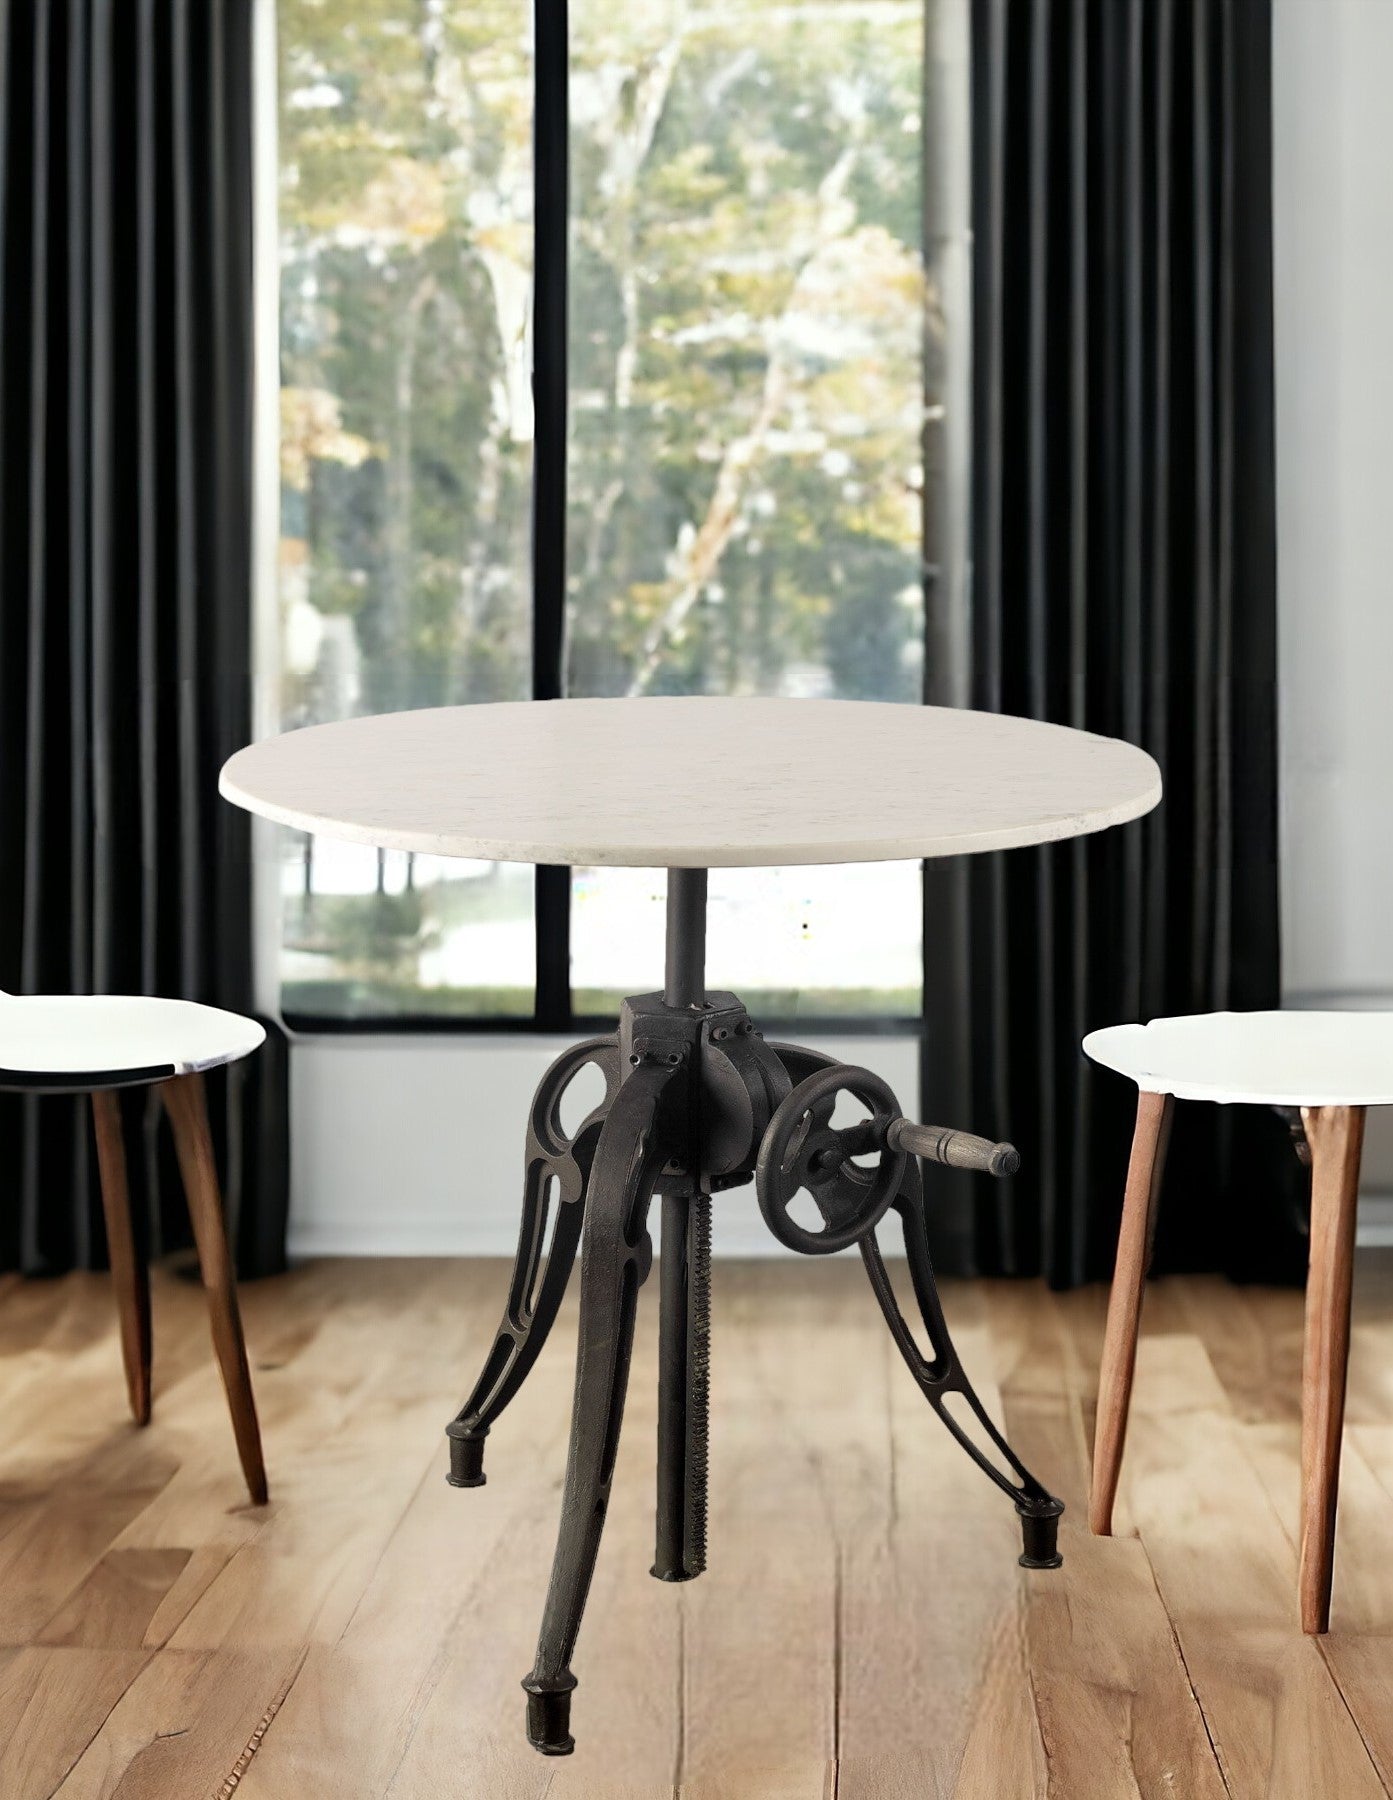 30" Round White Marble Top With Black Metal Base Dining Table